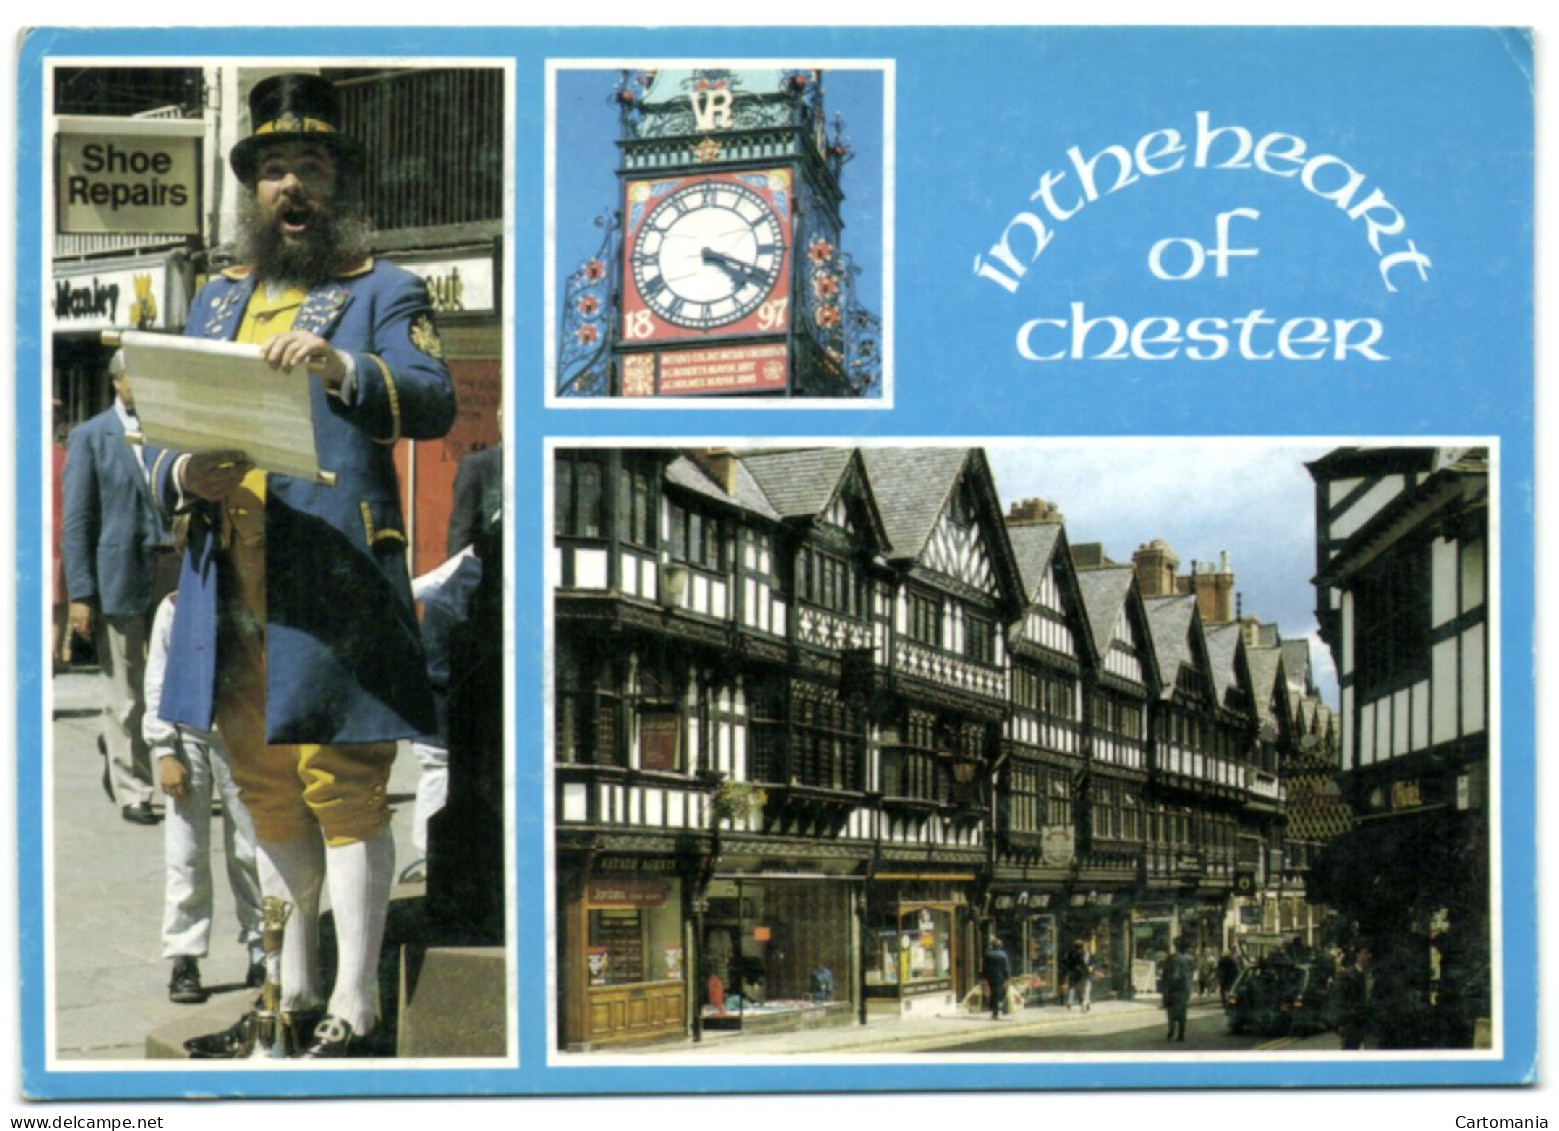 In The Heart Of Chester - The Town Crier - The Clock Tower - St. Werburgh Street - Chester